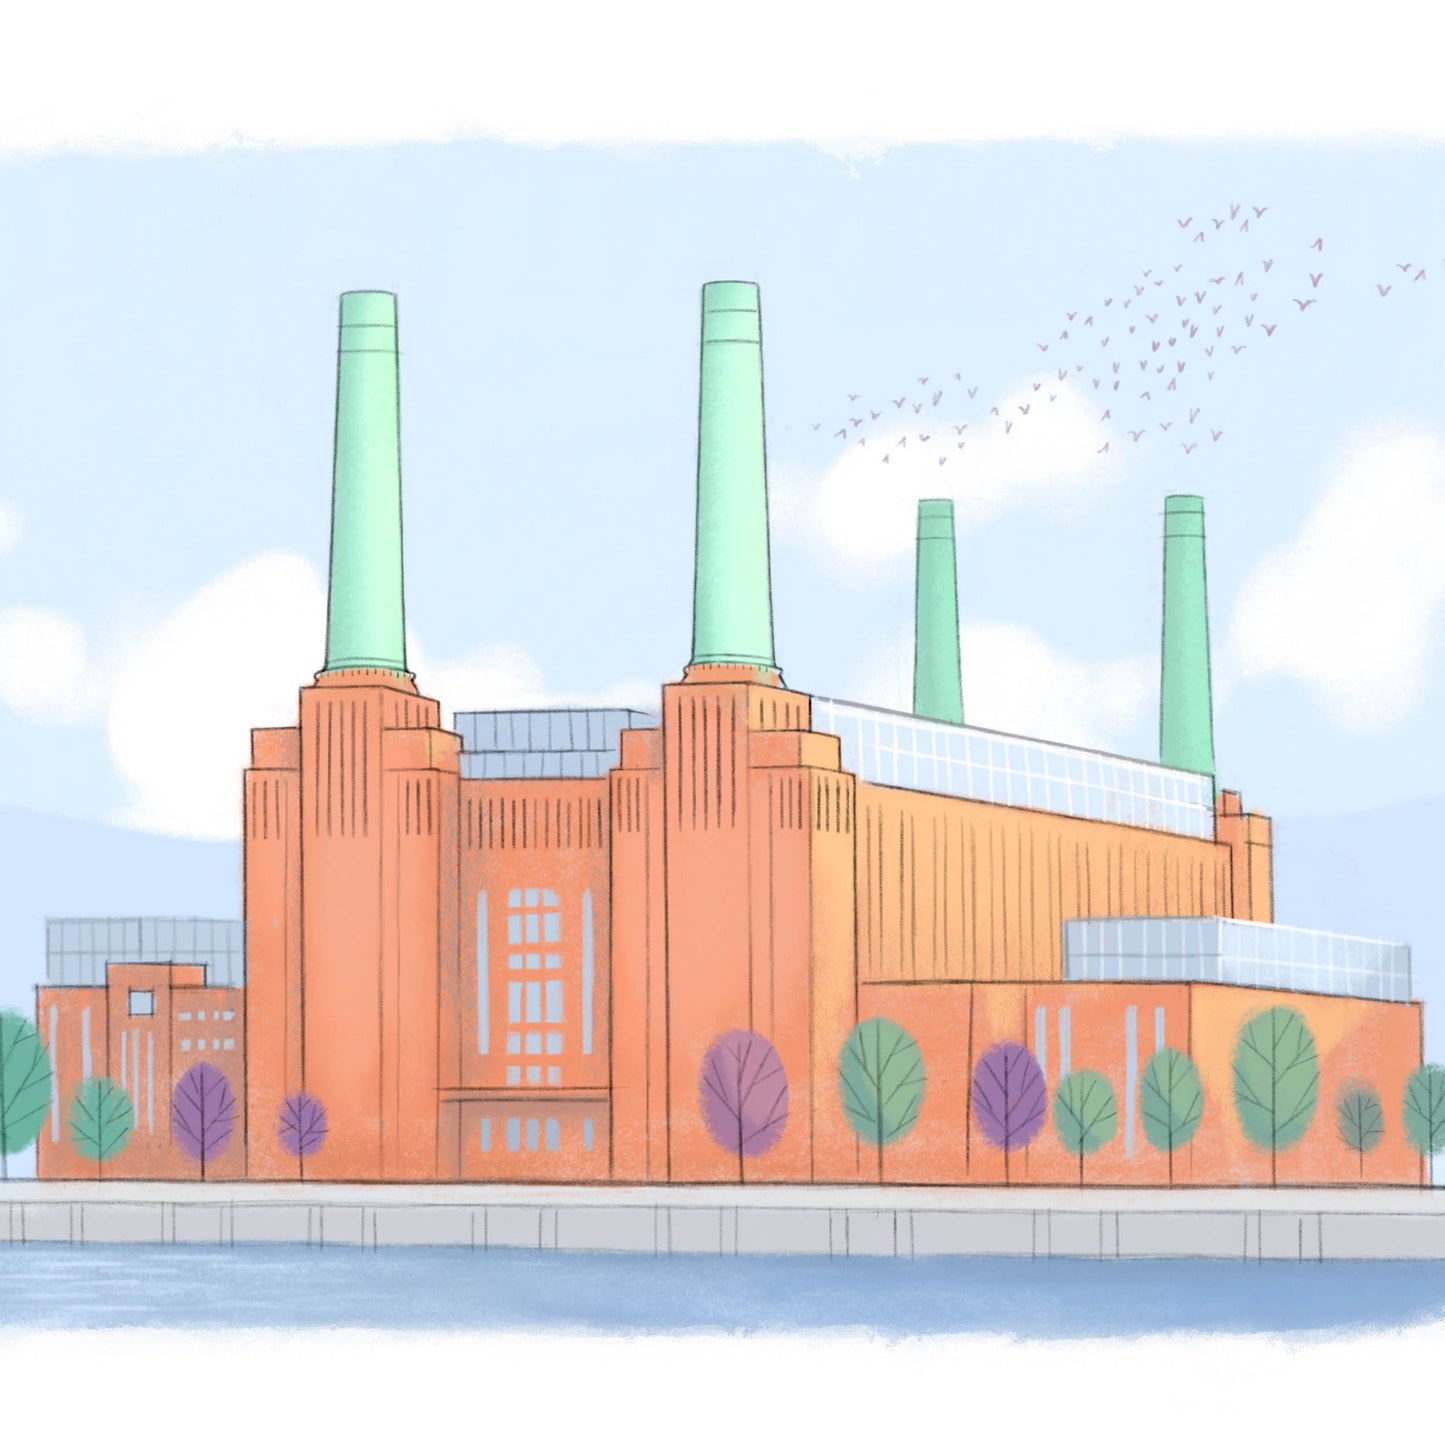 Detail from the print of London's Battersea Power Station beautifully illustrated by Mike Green.